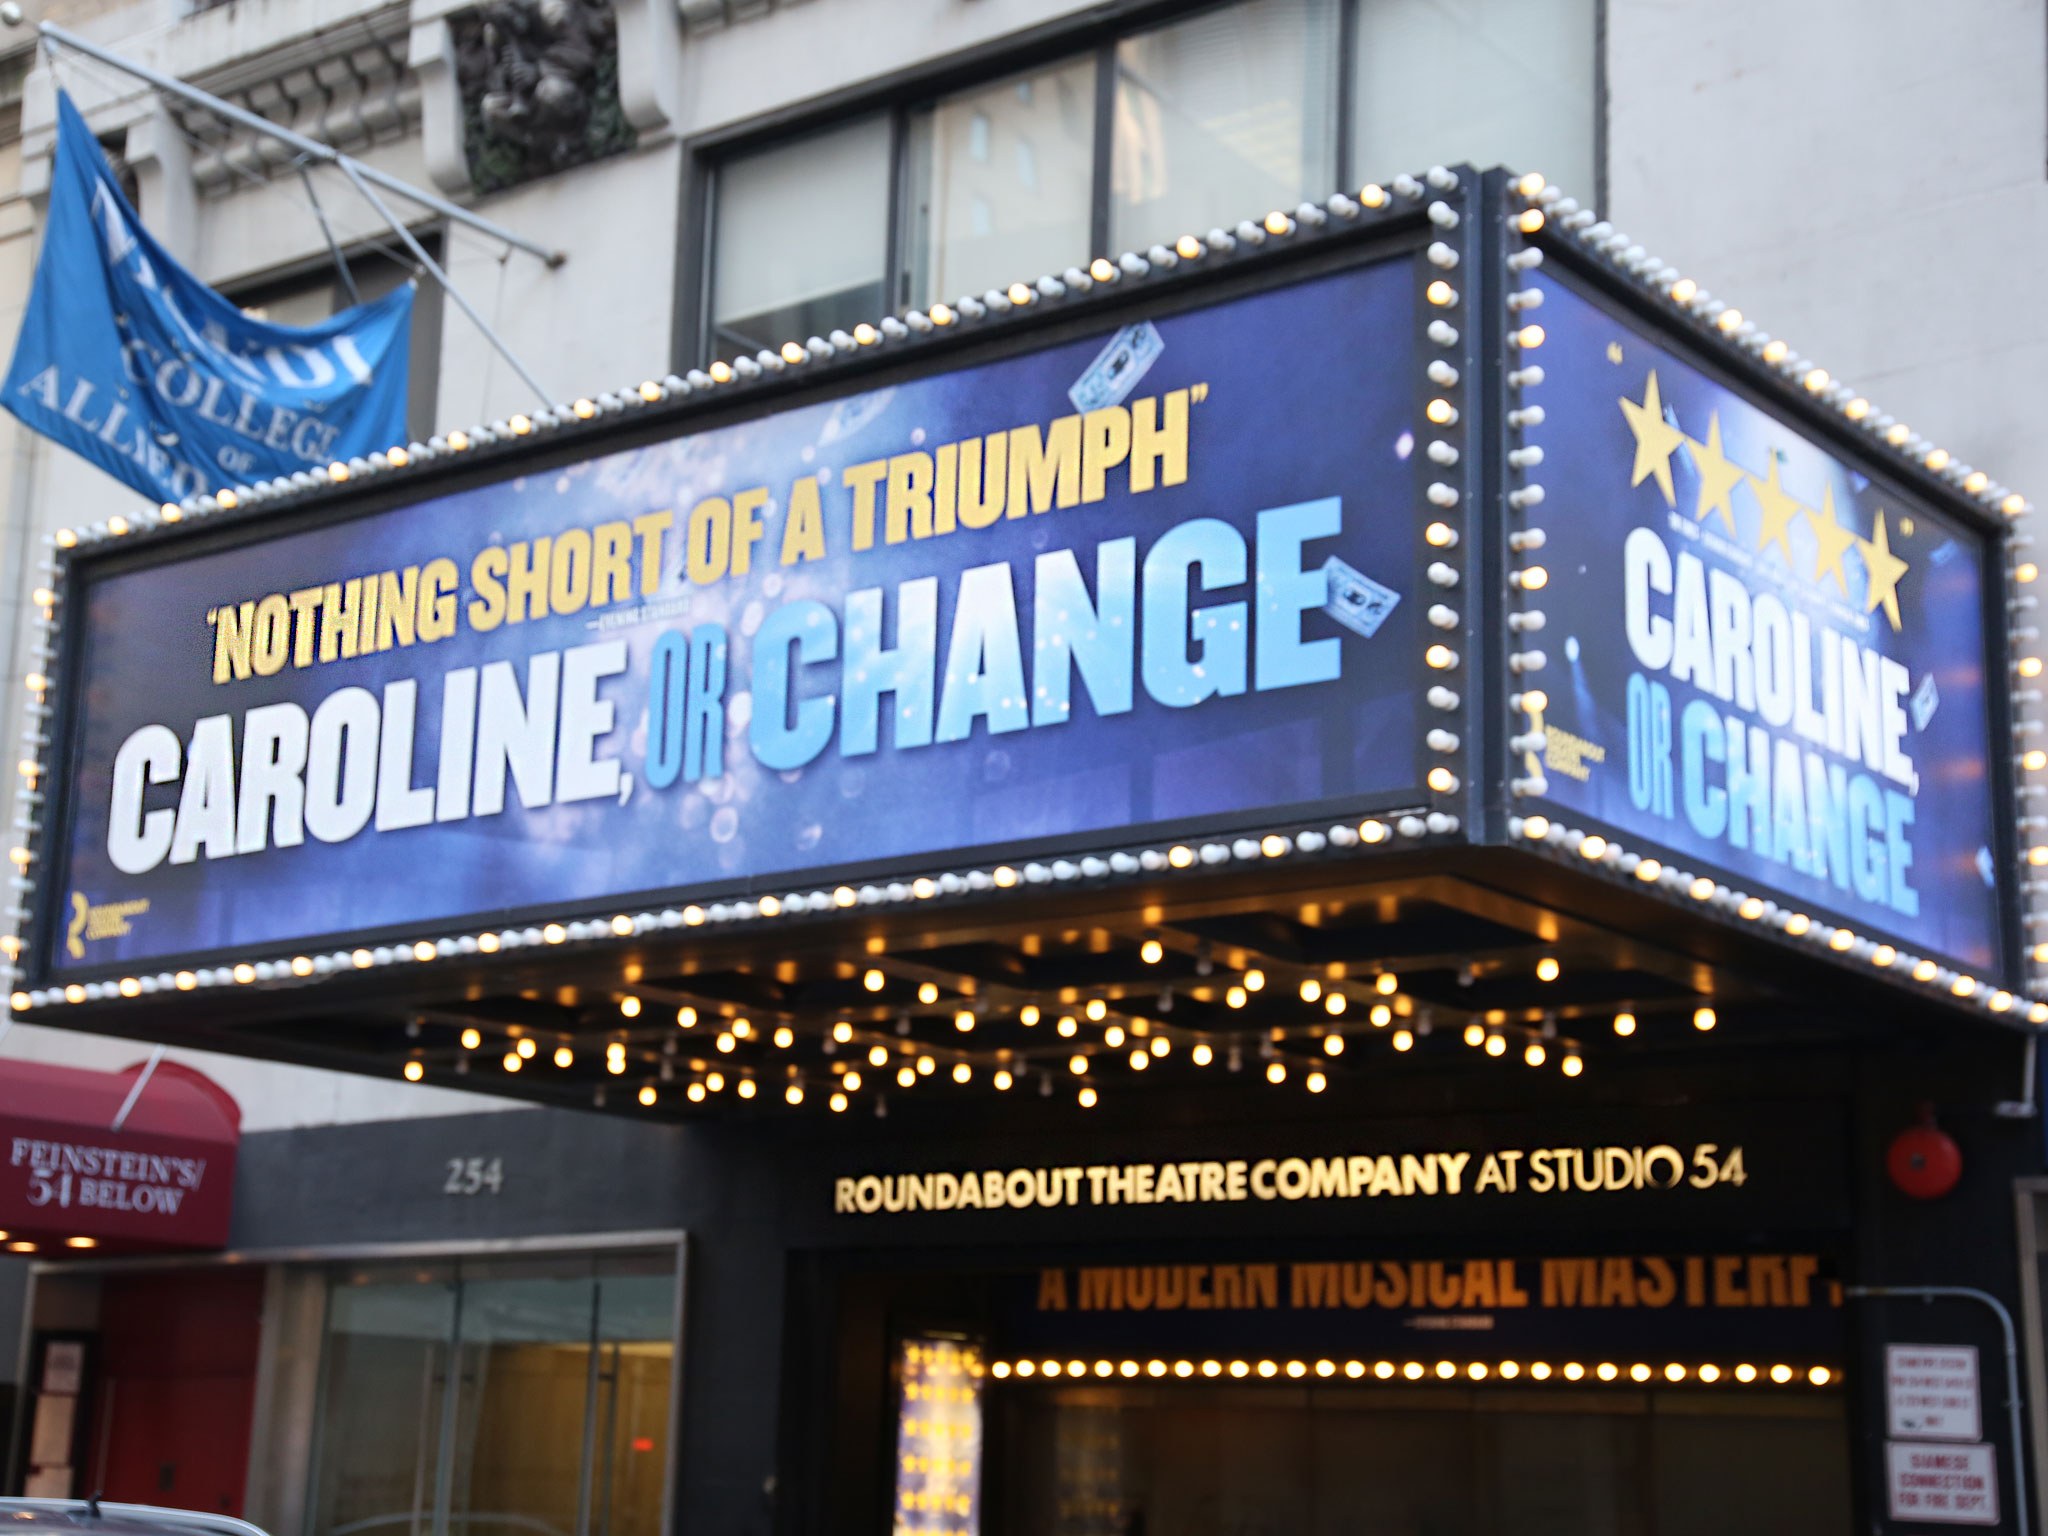 Caroline, or Change Marquee